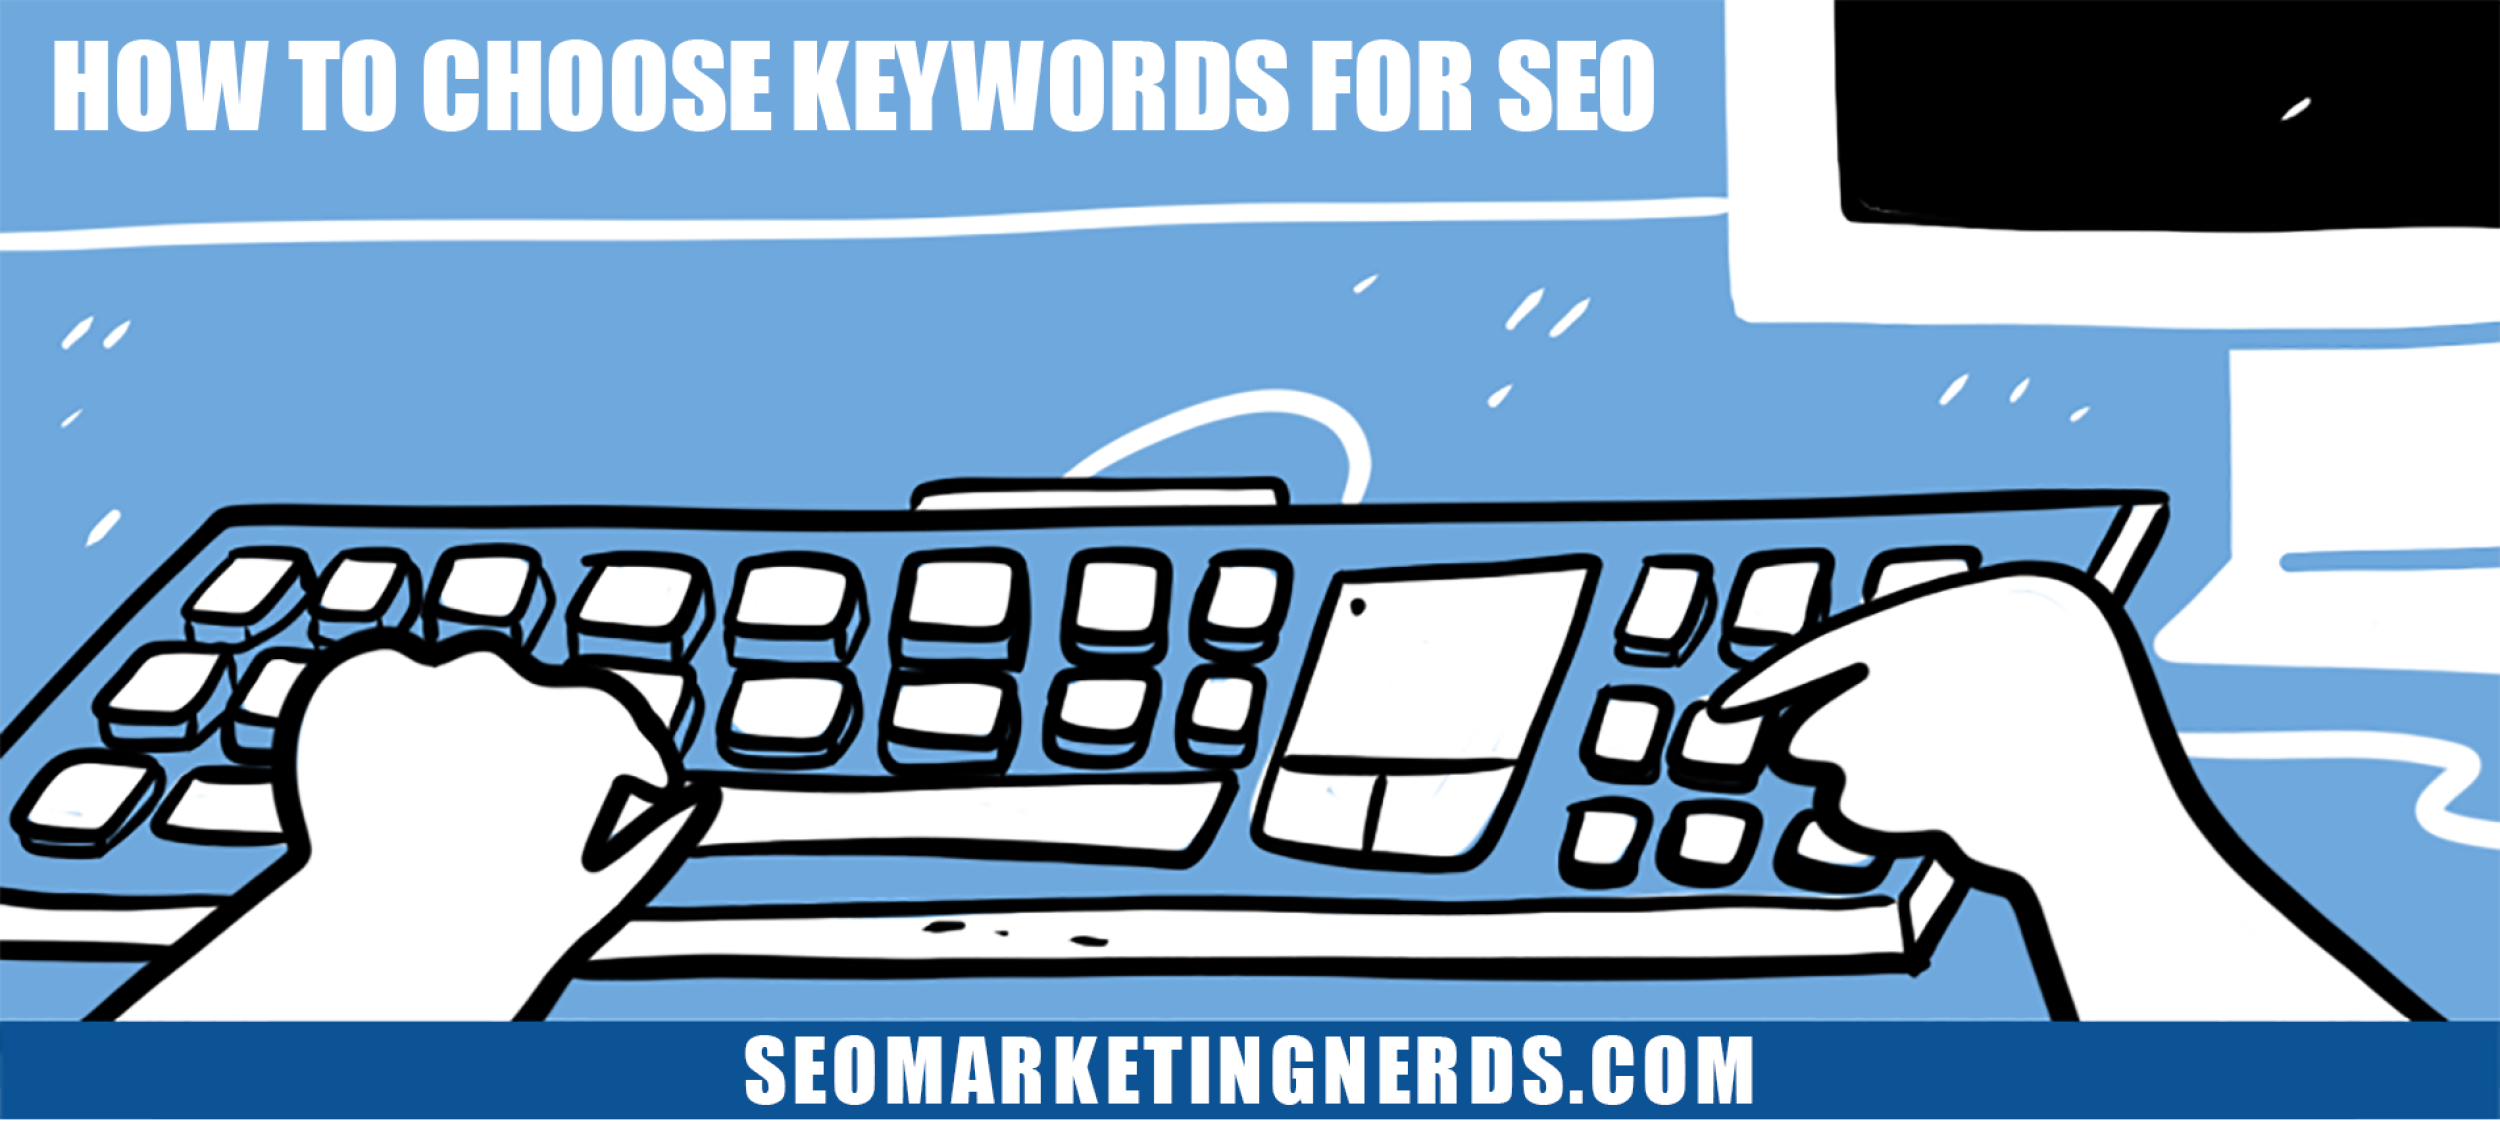 How To Choose Keywords for SEO